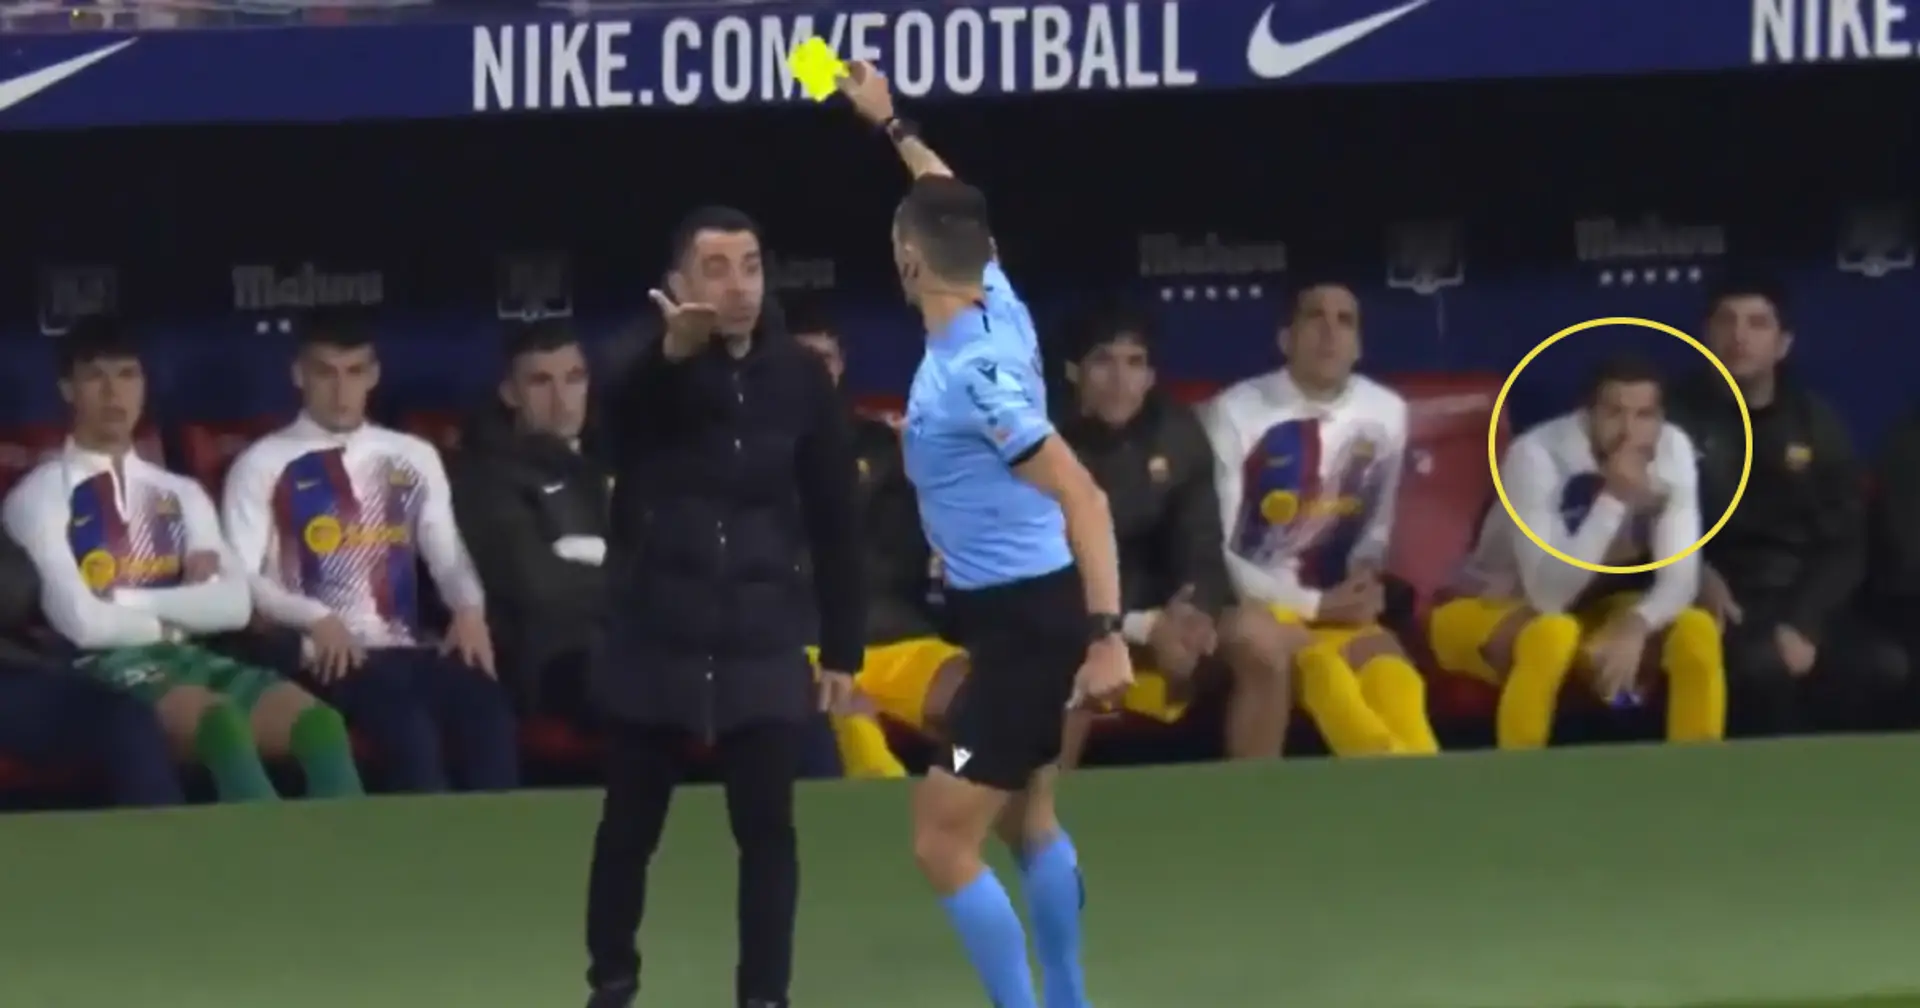 Caught on camera: Barca substitute bursts into uncontrollable laughter after Xavi yellow card